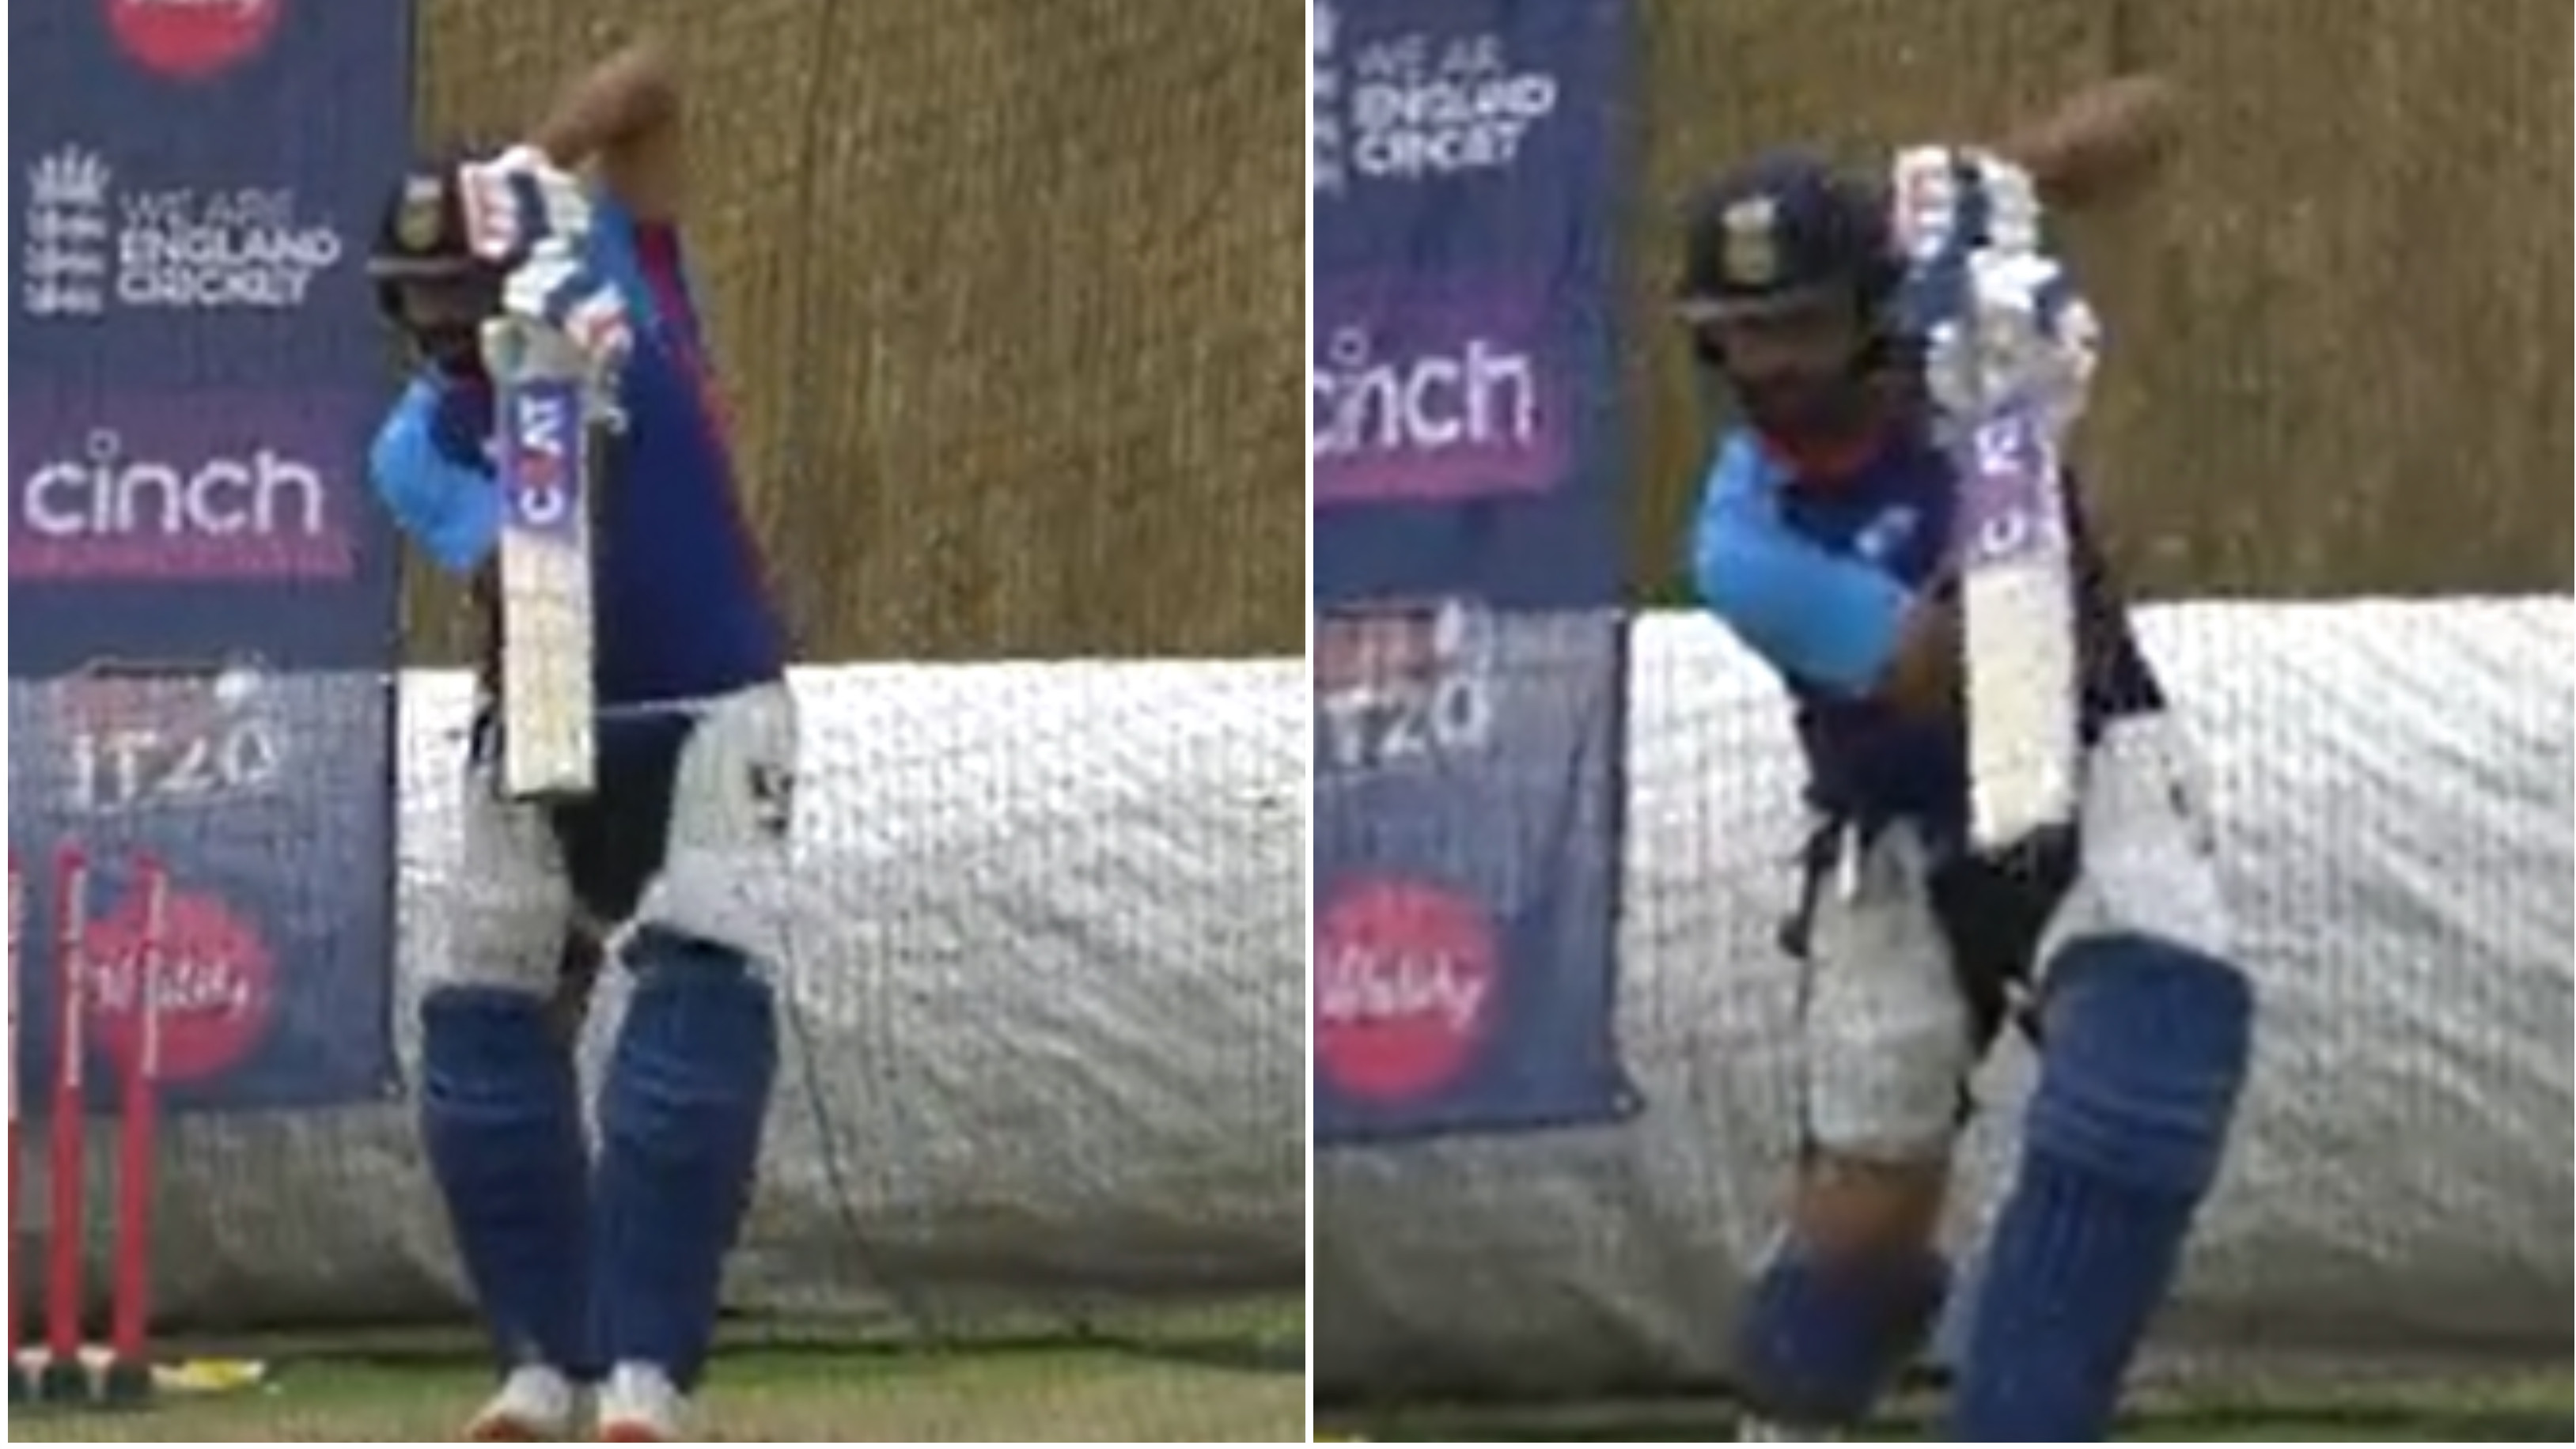 ENG v IND 2022: Rohit Sharma joins Indian team in Southampton ahead of 1st T20I; plays trademark cover drives in nets